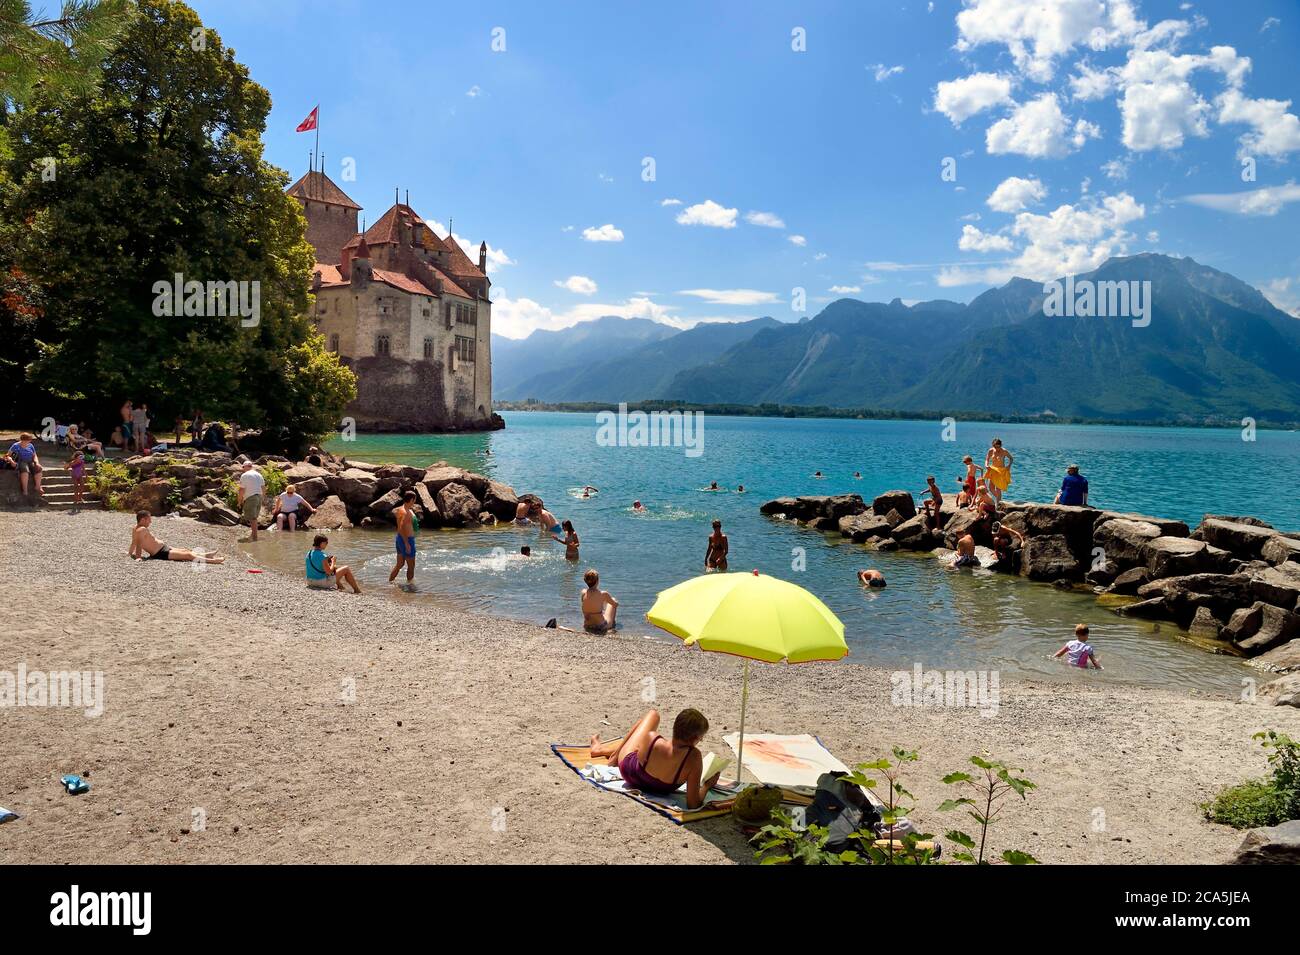 Switzerland, Canton of Vaud, Veytaux, the small beach at the foot of the Chillon castle on the shores of Lake Geneva (Lac Leman) Stock Photo